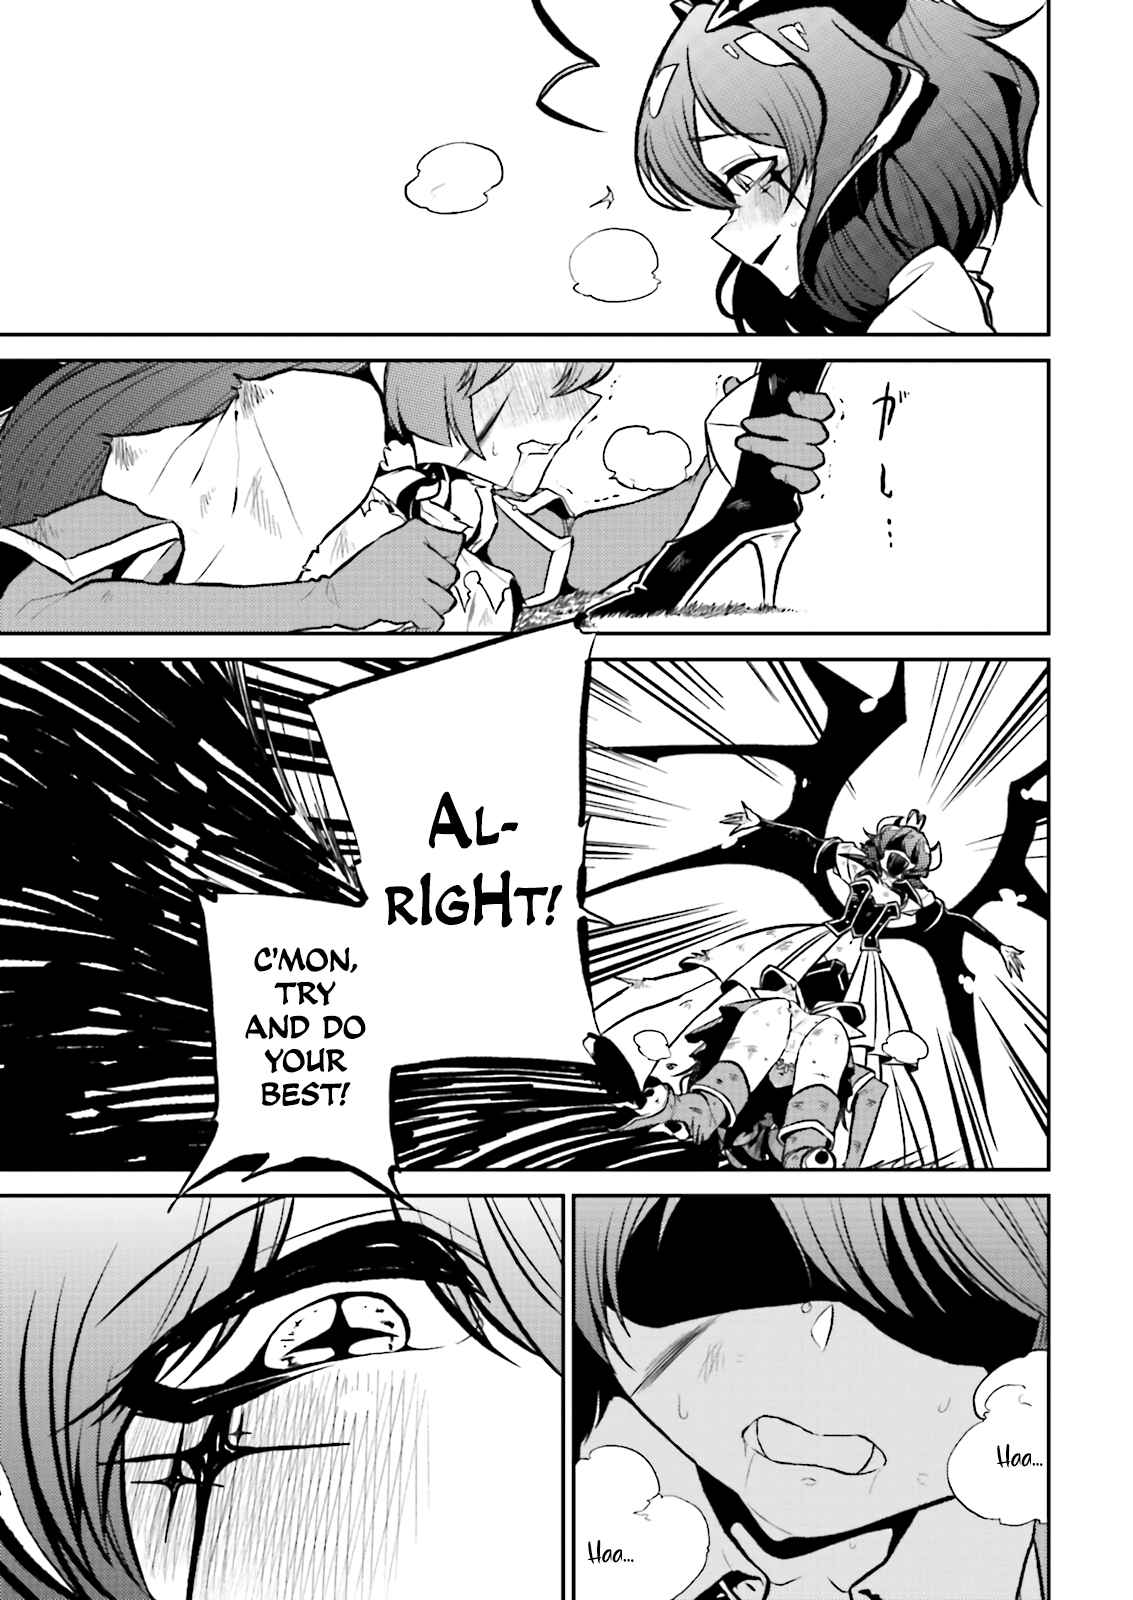 Looking Up To Magical Girls Vol. 2 Ch. 10